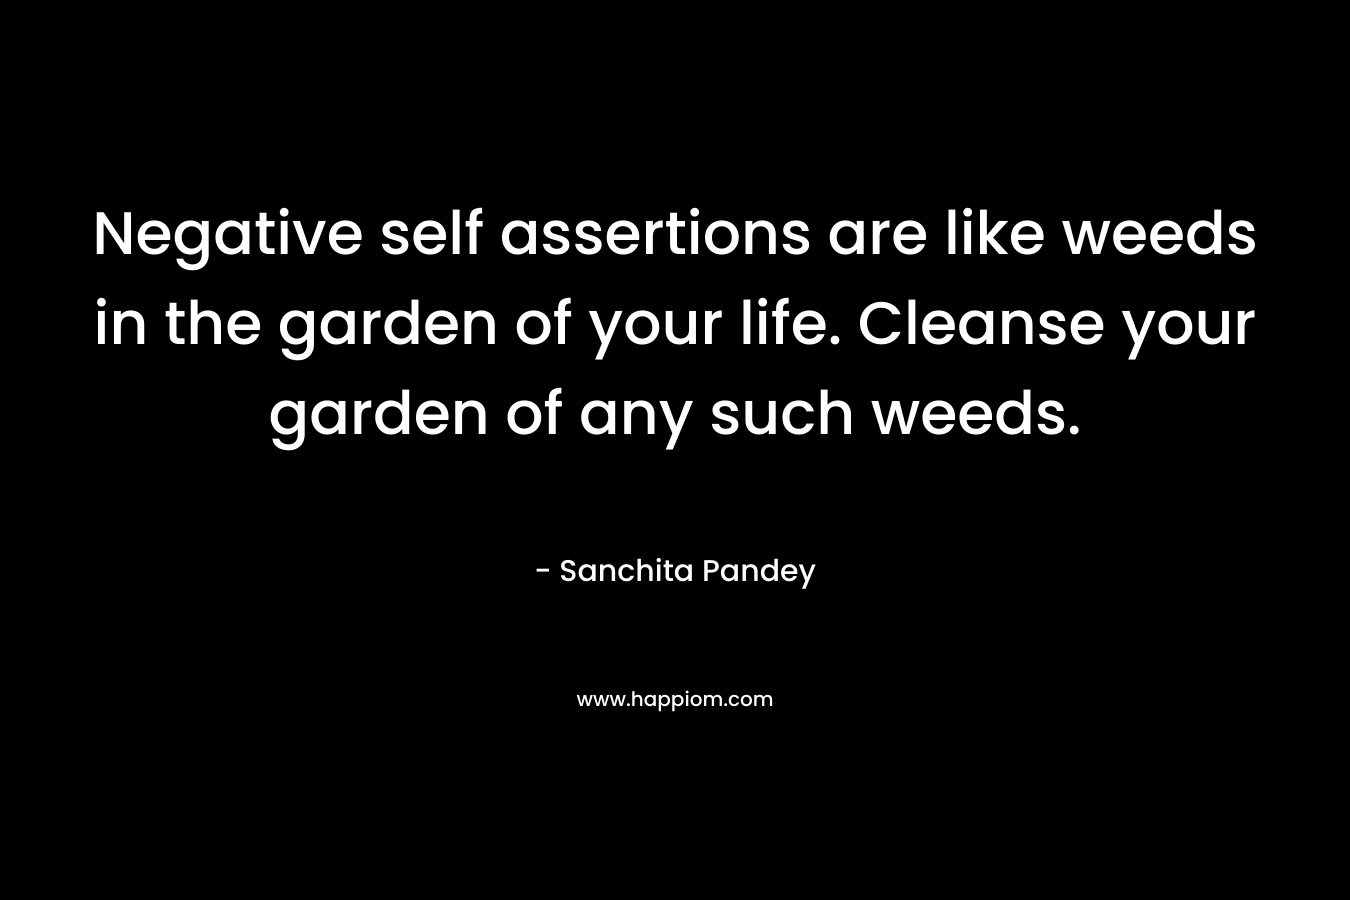 Negative self assertions are like weeds in the garden of your life. Cleanse your garden of any such weeds.